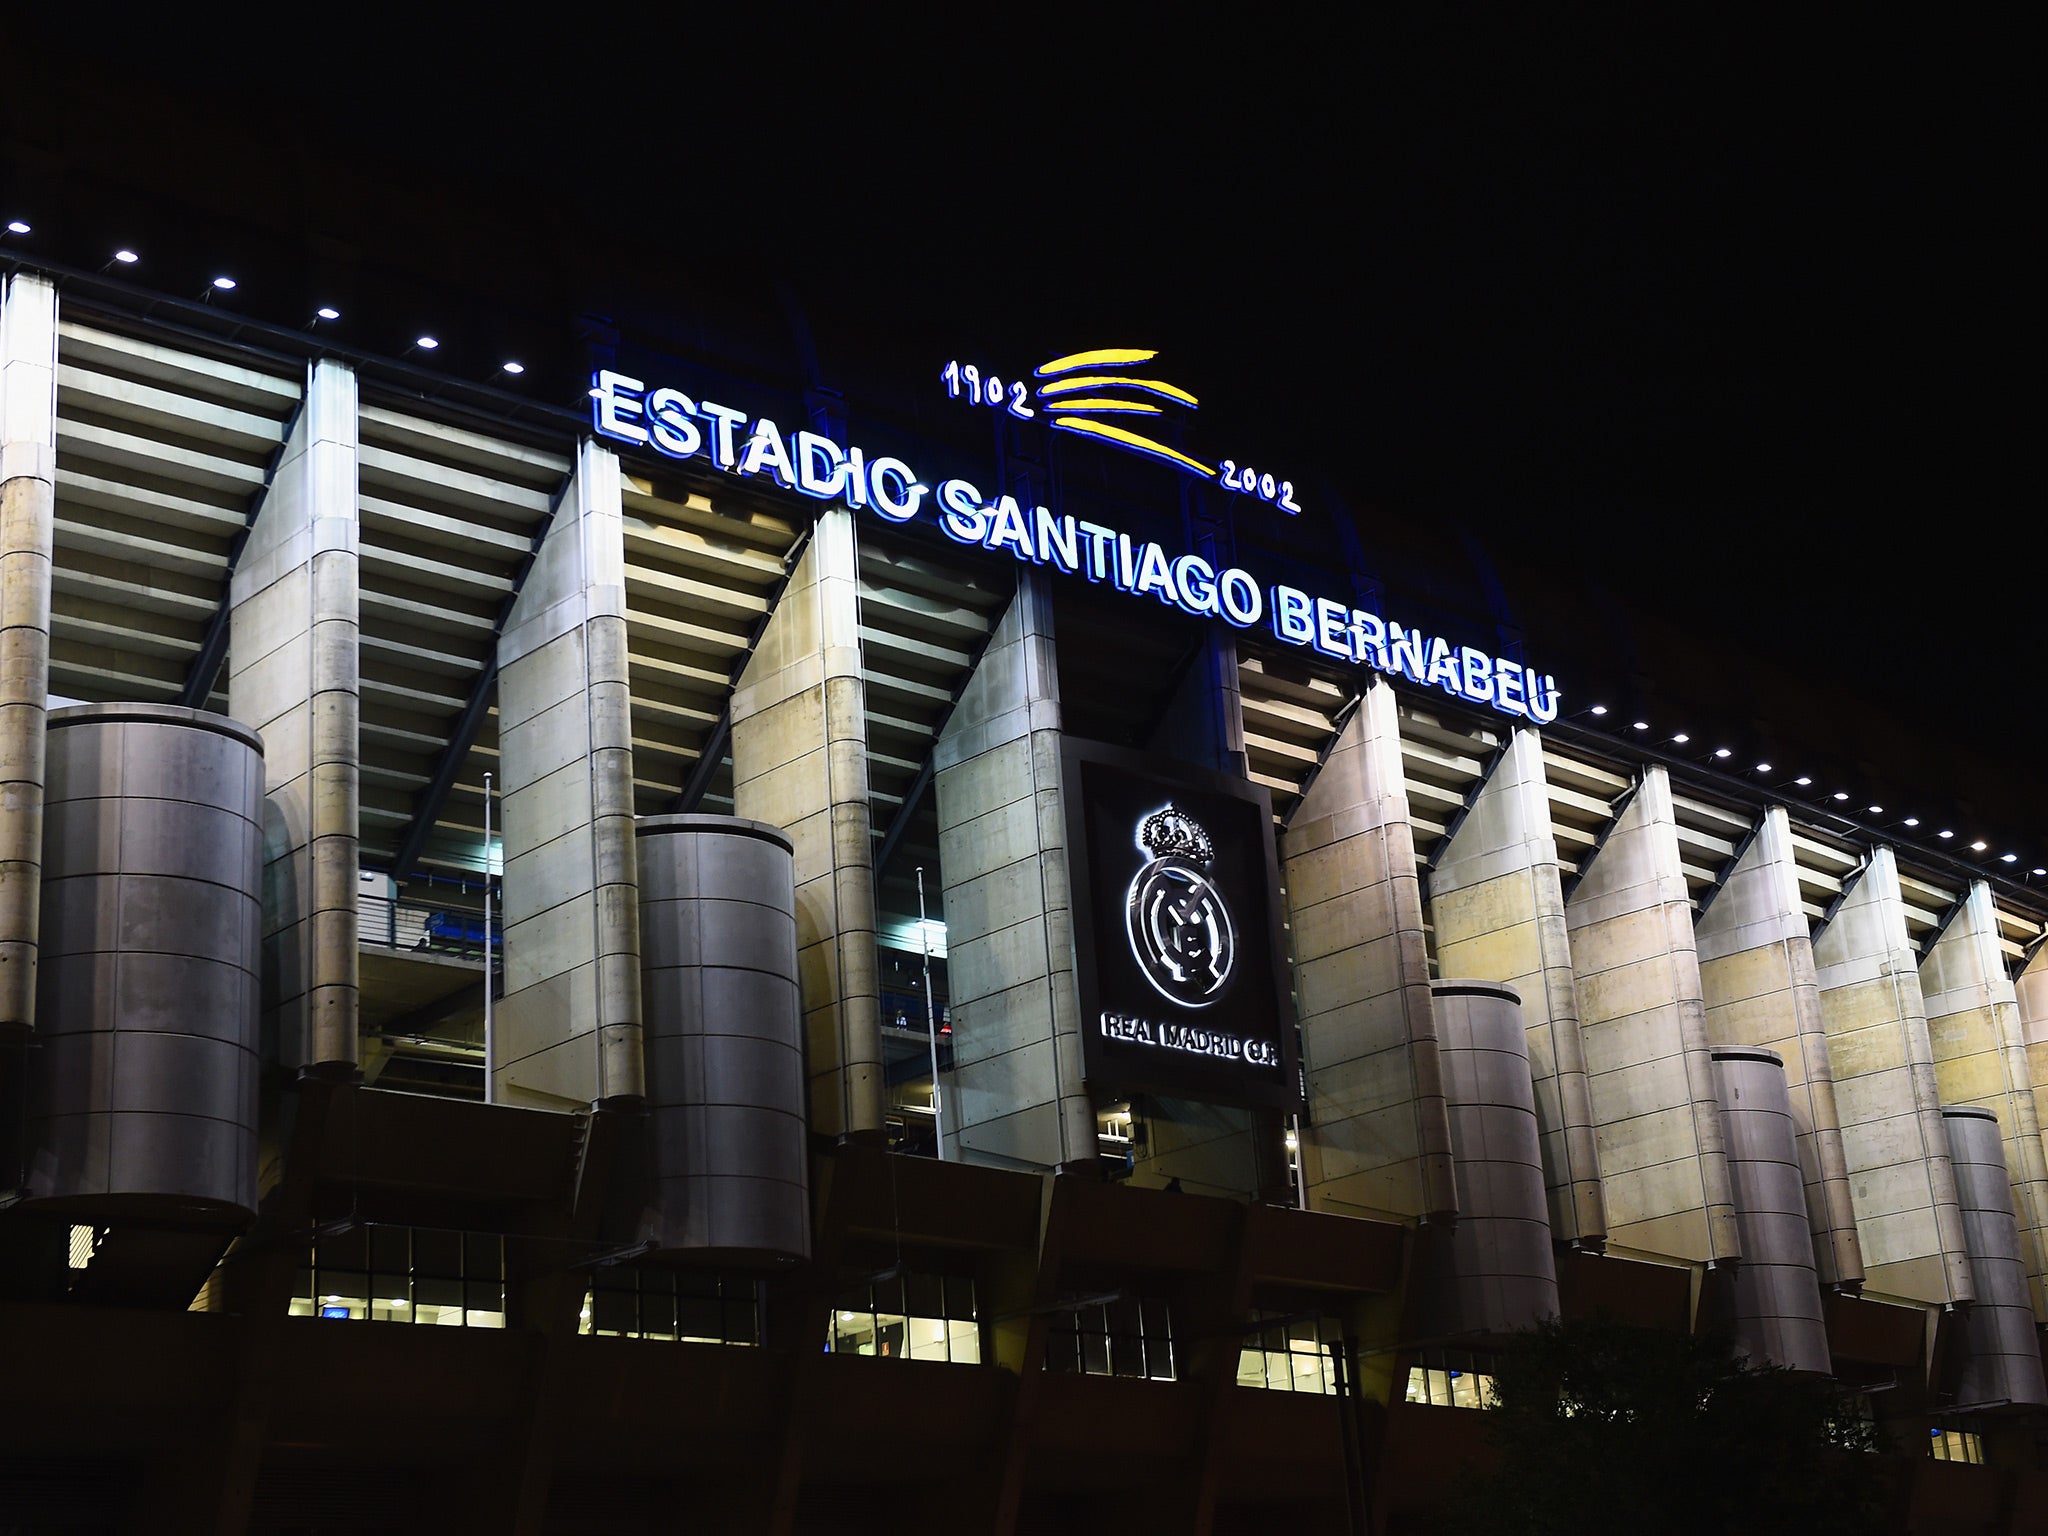 Will Real Madrid's Bernabeu, for once, host the Copa del Rey final?